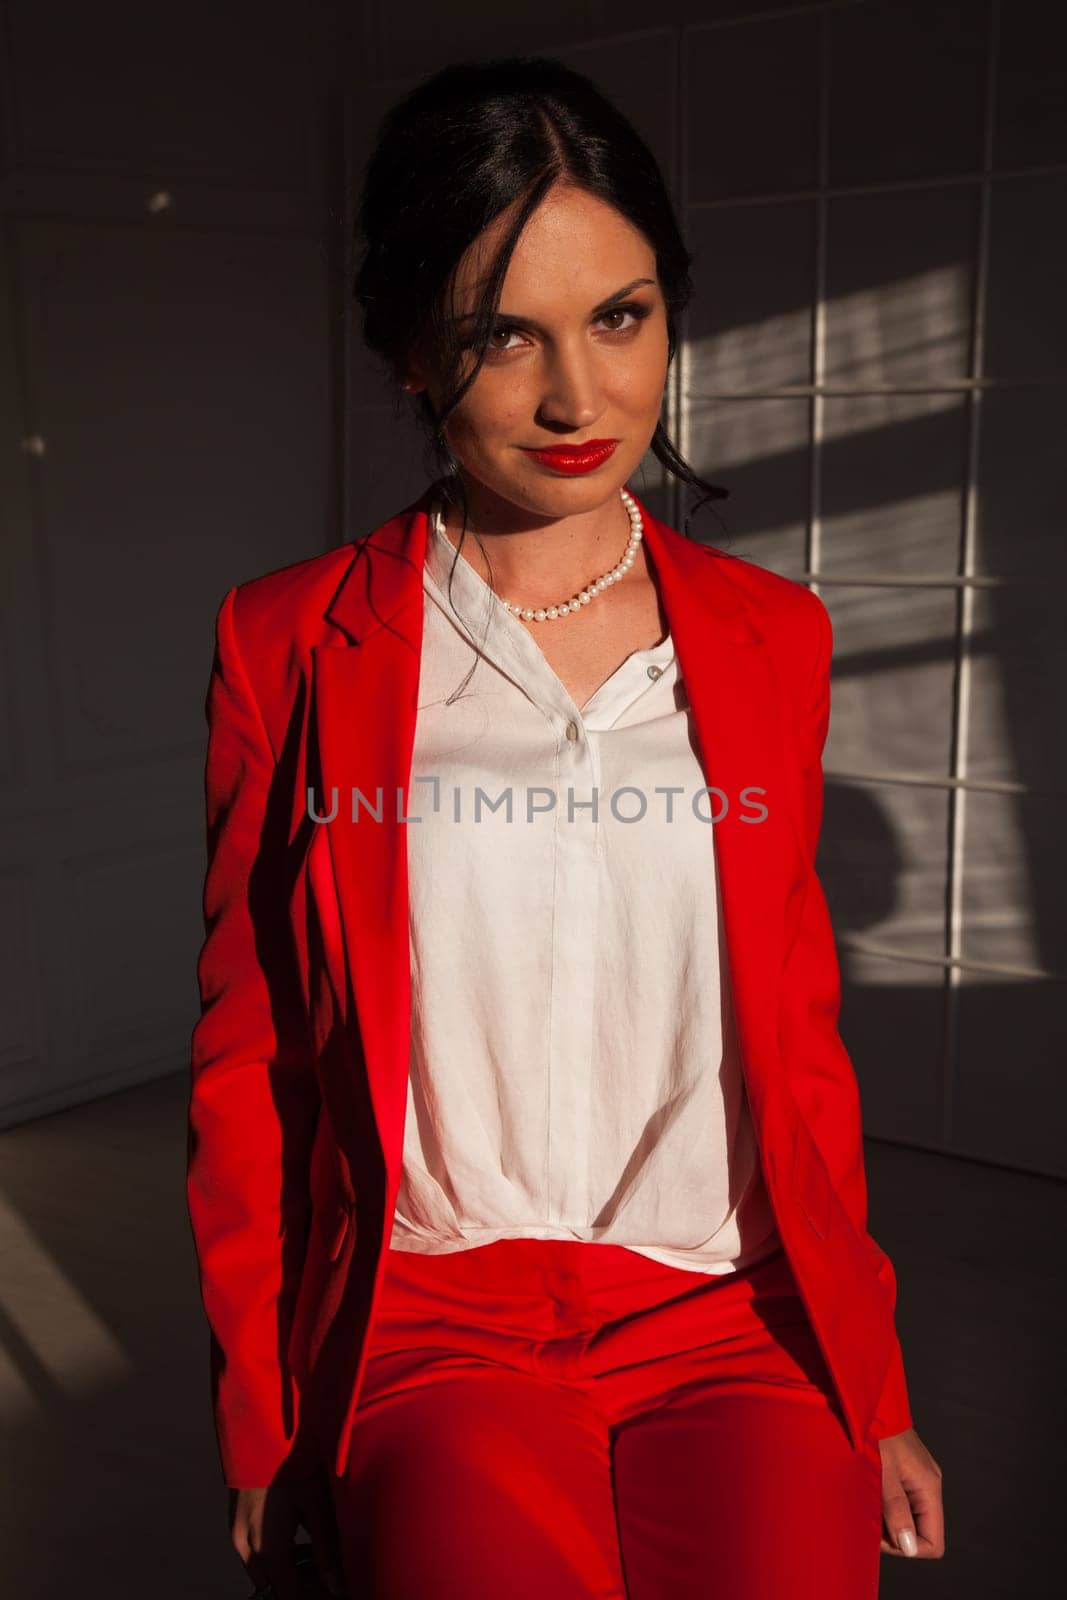 business woman brunette in a red business suit in the office